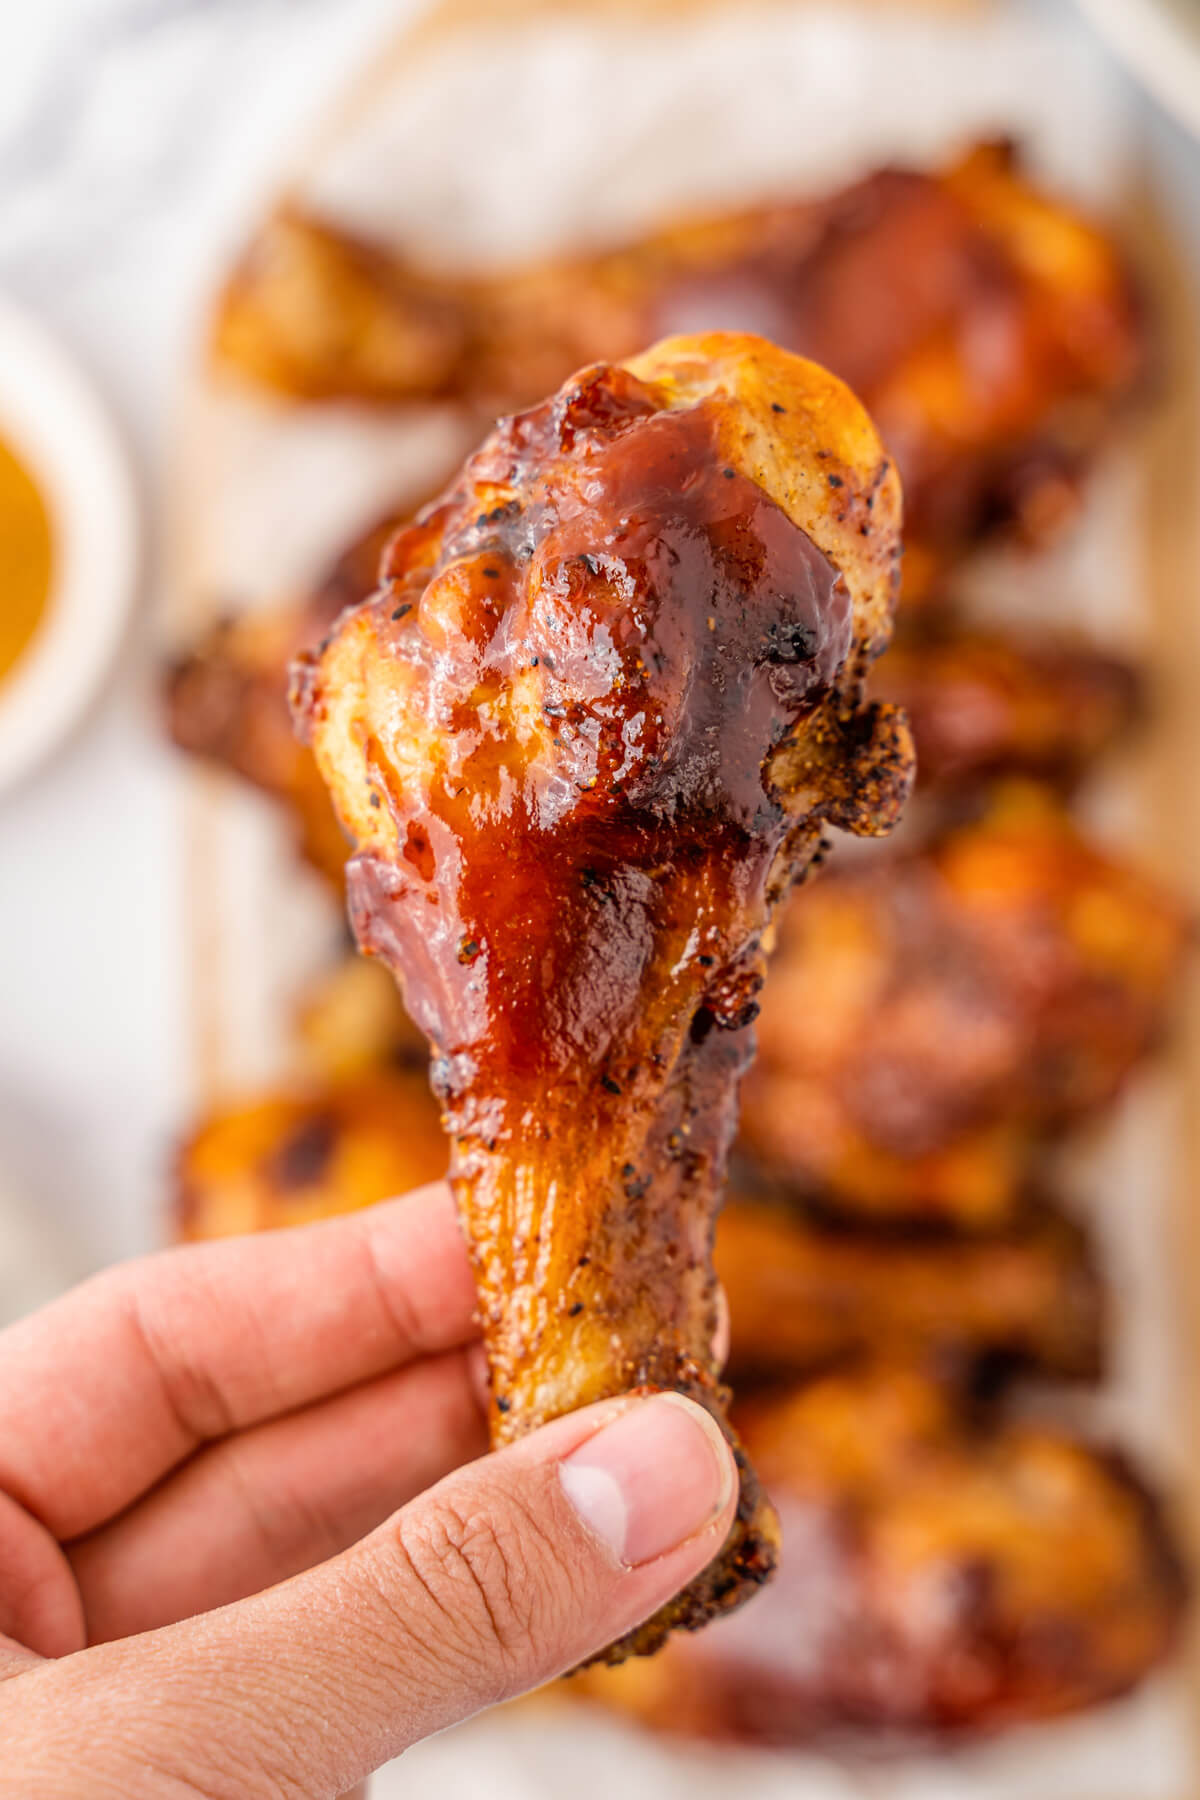 A hand holds a chicken leg coated in barbecue sauce.